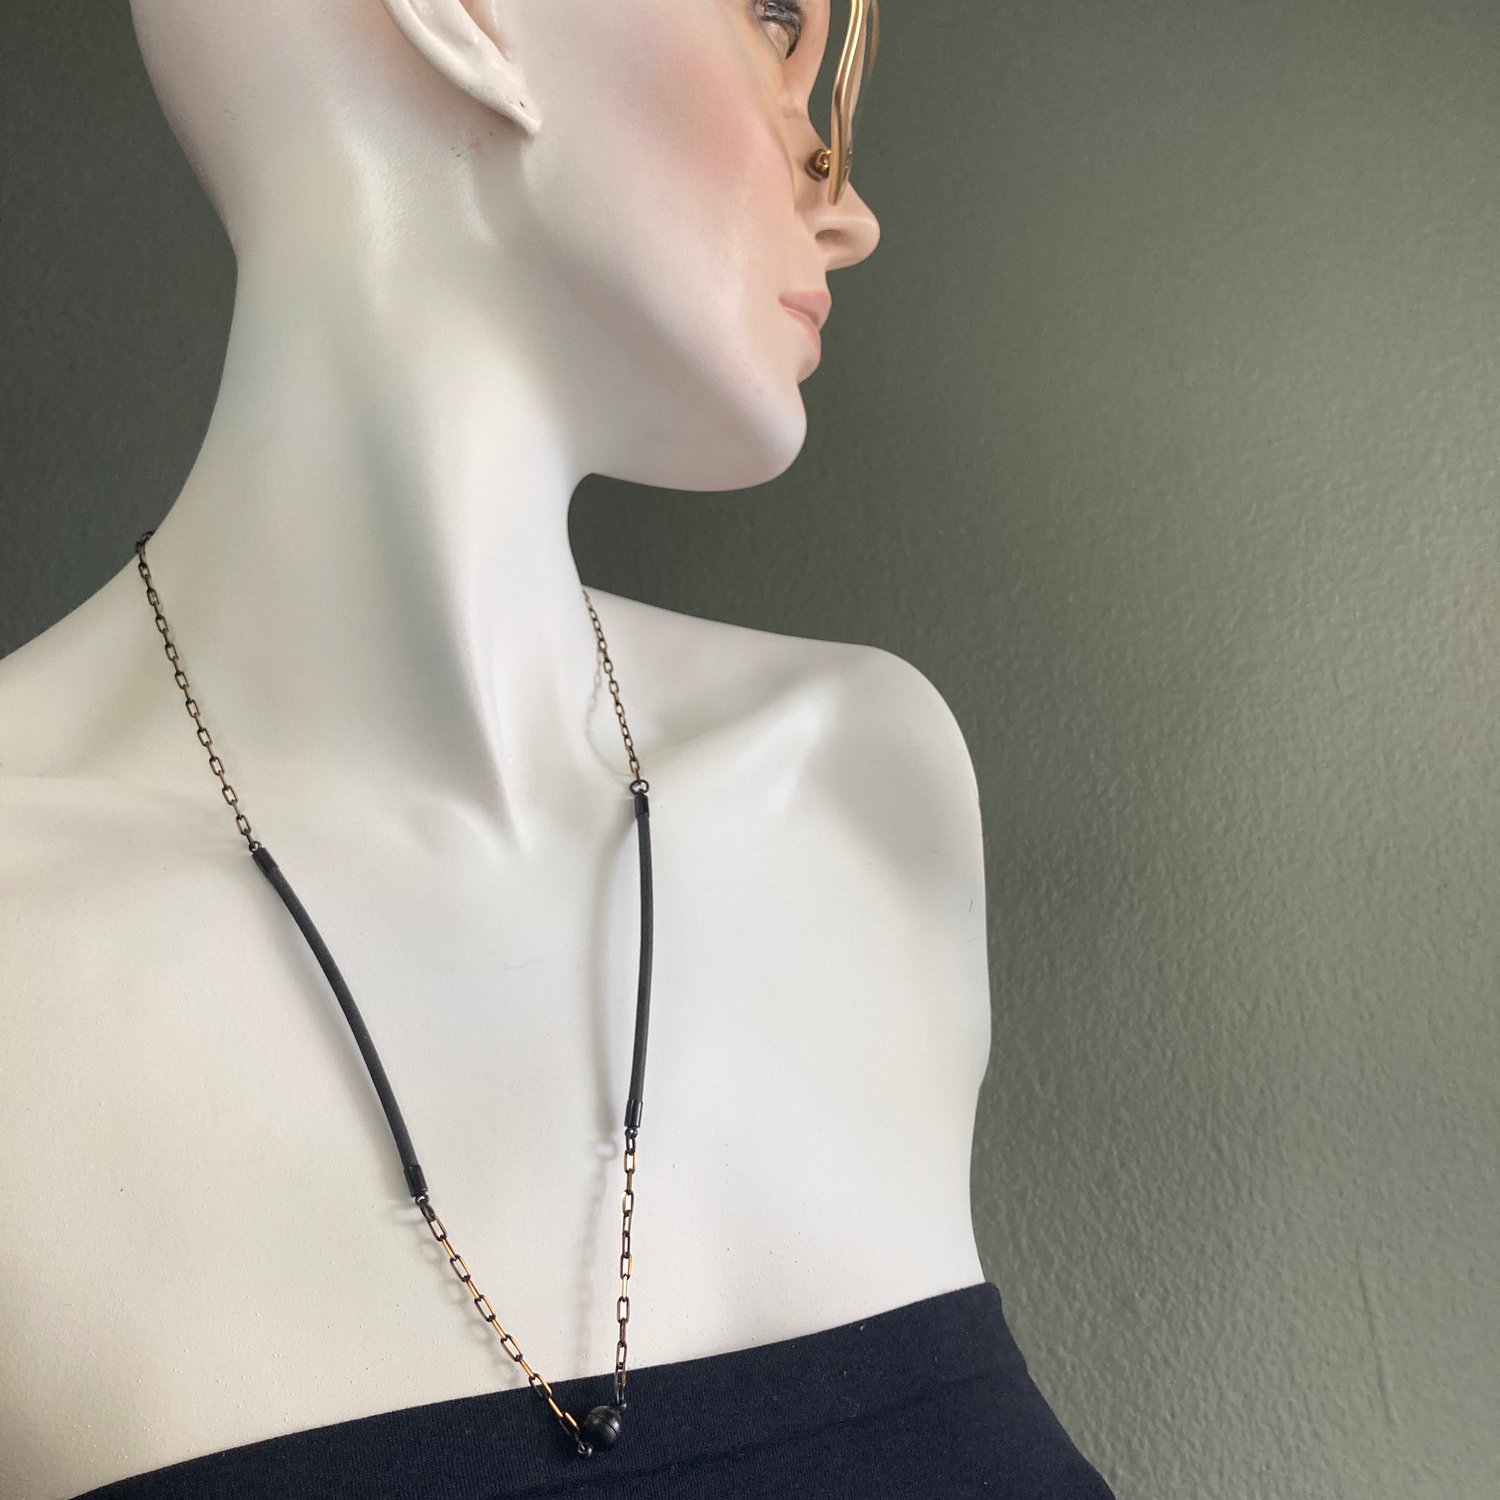 Image of Black & Brass Convertible Eyeglass Chain/Necklace